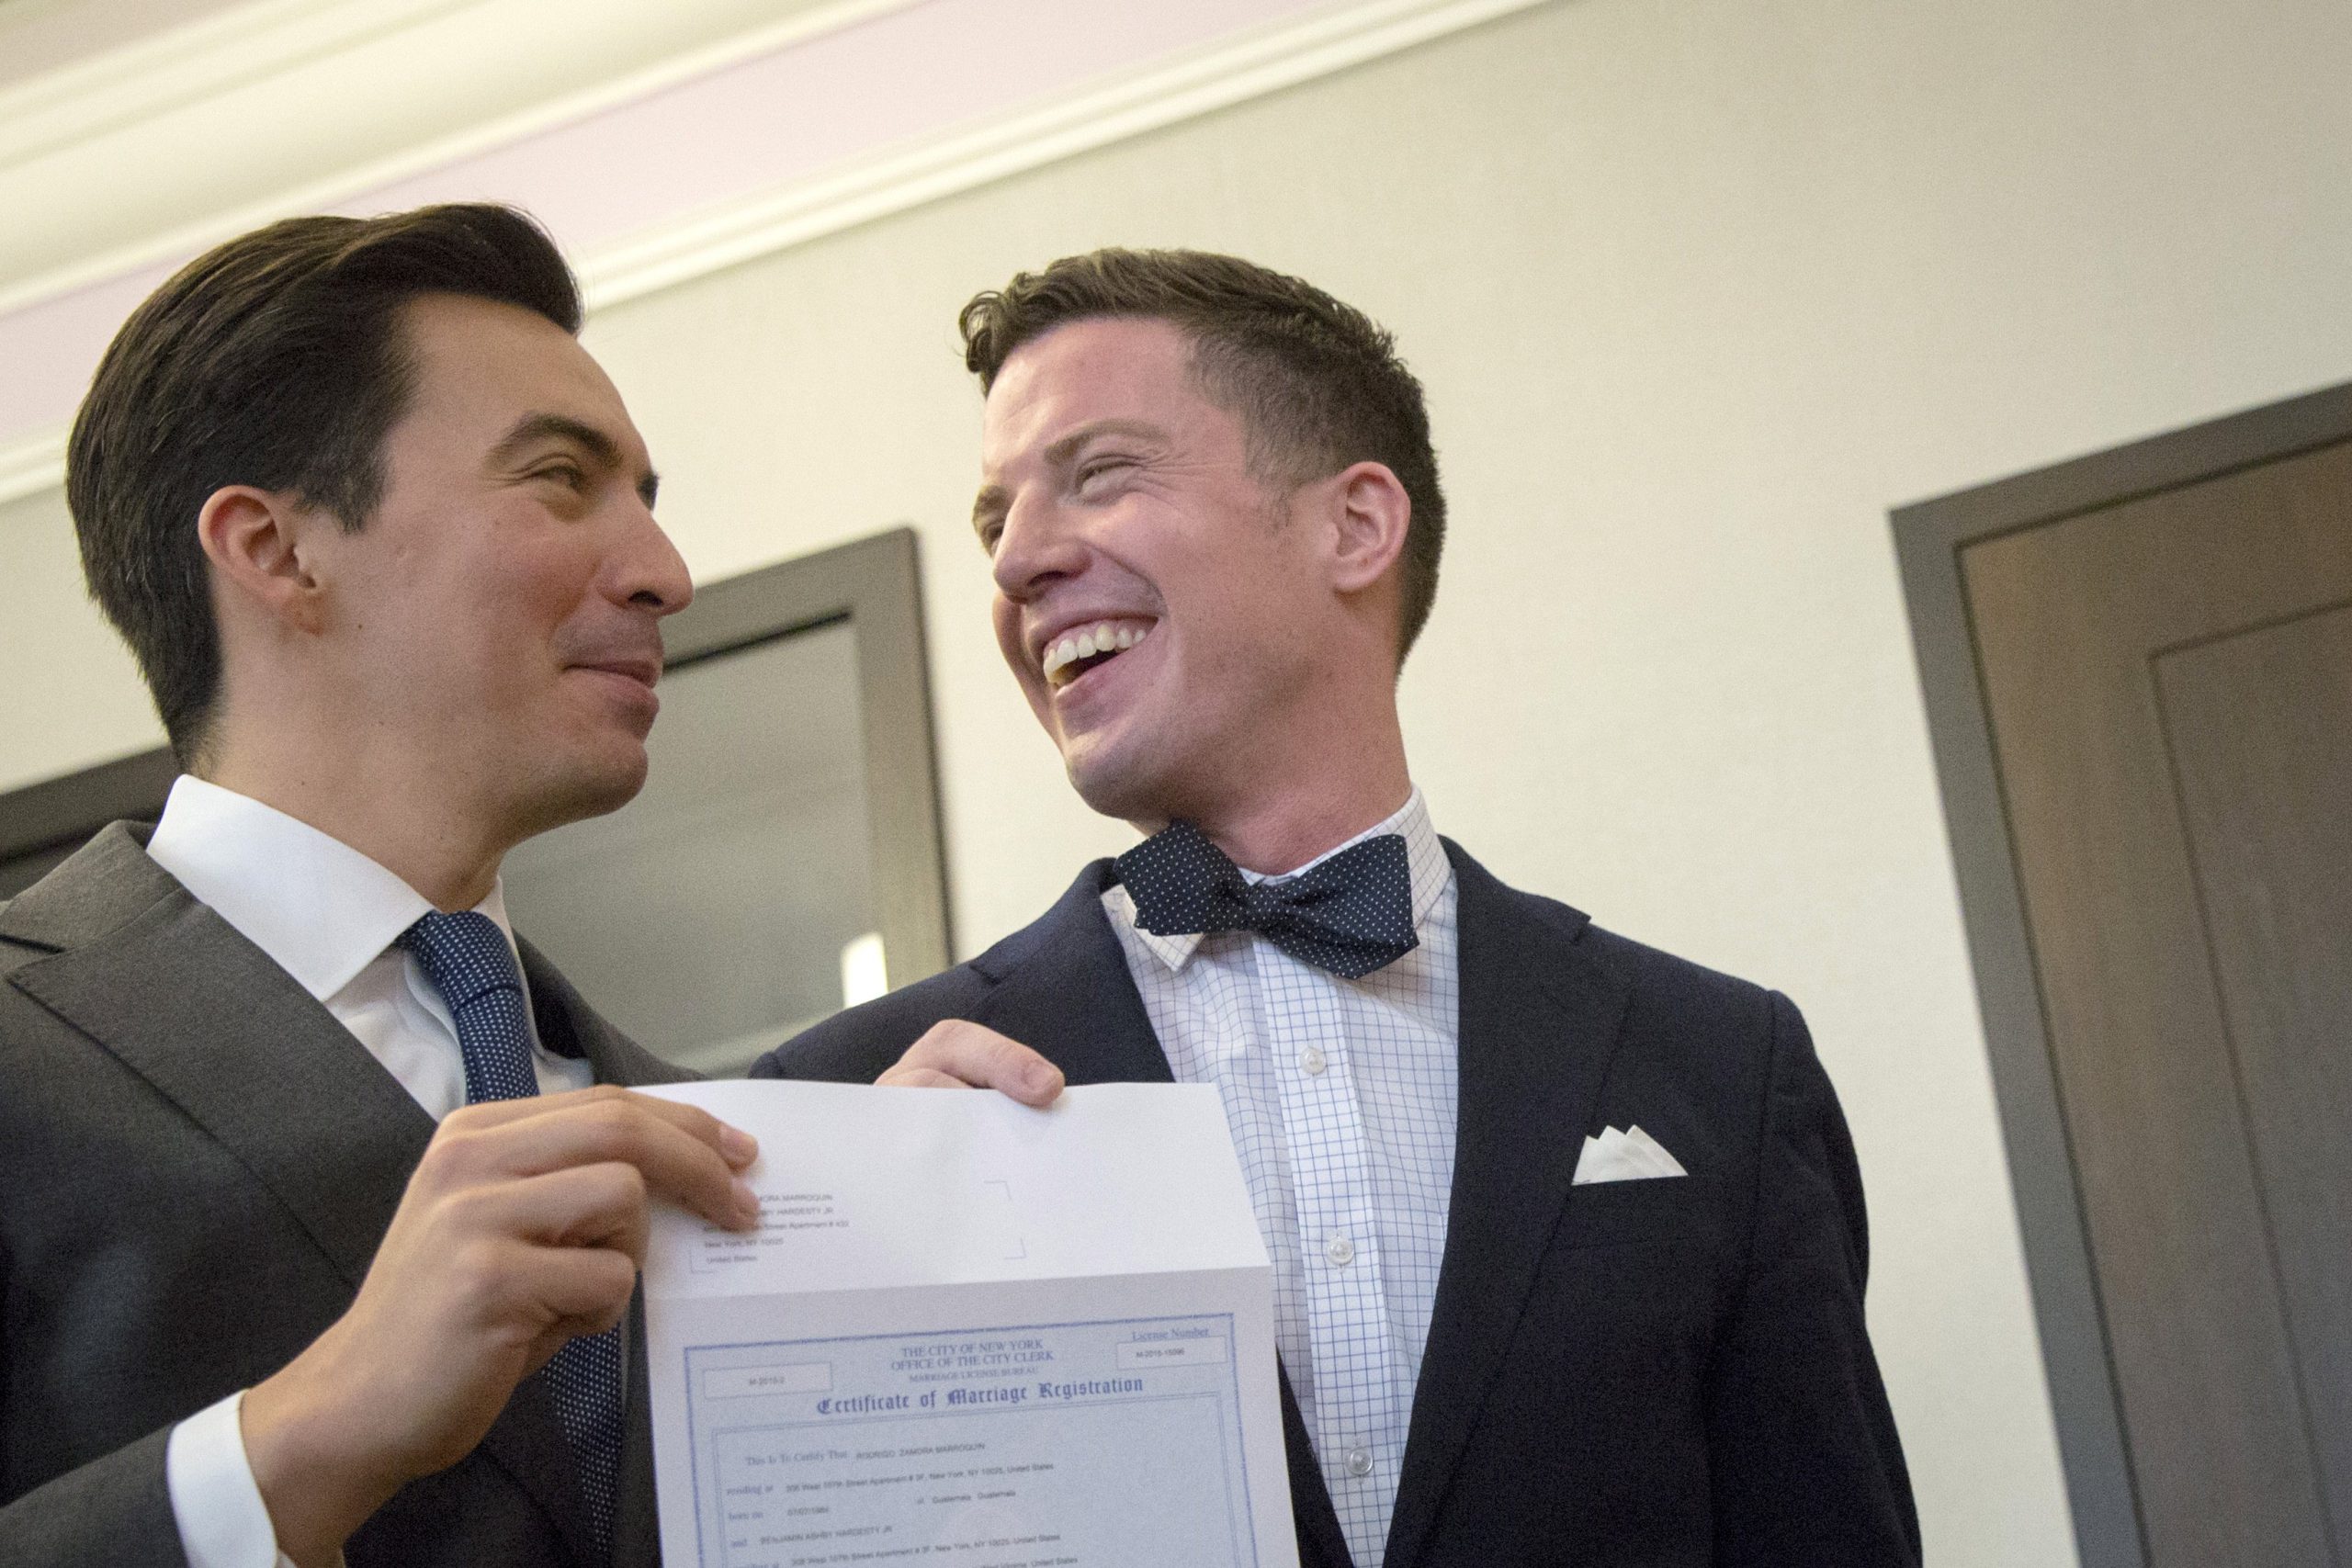 Rodrigo Zamora, left, and Ashby Hardesty show their marriage license to friends at the New York City clerk's office after their wedding in Manhattan June 26, 2015. That day the U.S. Supreme Court ruled the U.S. Constitution provides same-sex couples the right to marry. On Sept. 15, 2022, the U.S. Senate delayed vote on a bill that would codify same-sex marriage until after the midterm elections. (CNS photo/Brendan McDermid, Reuters)